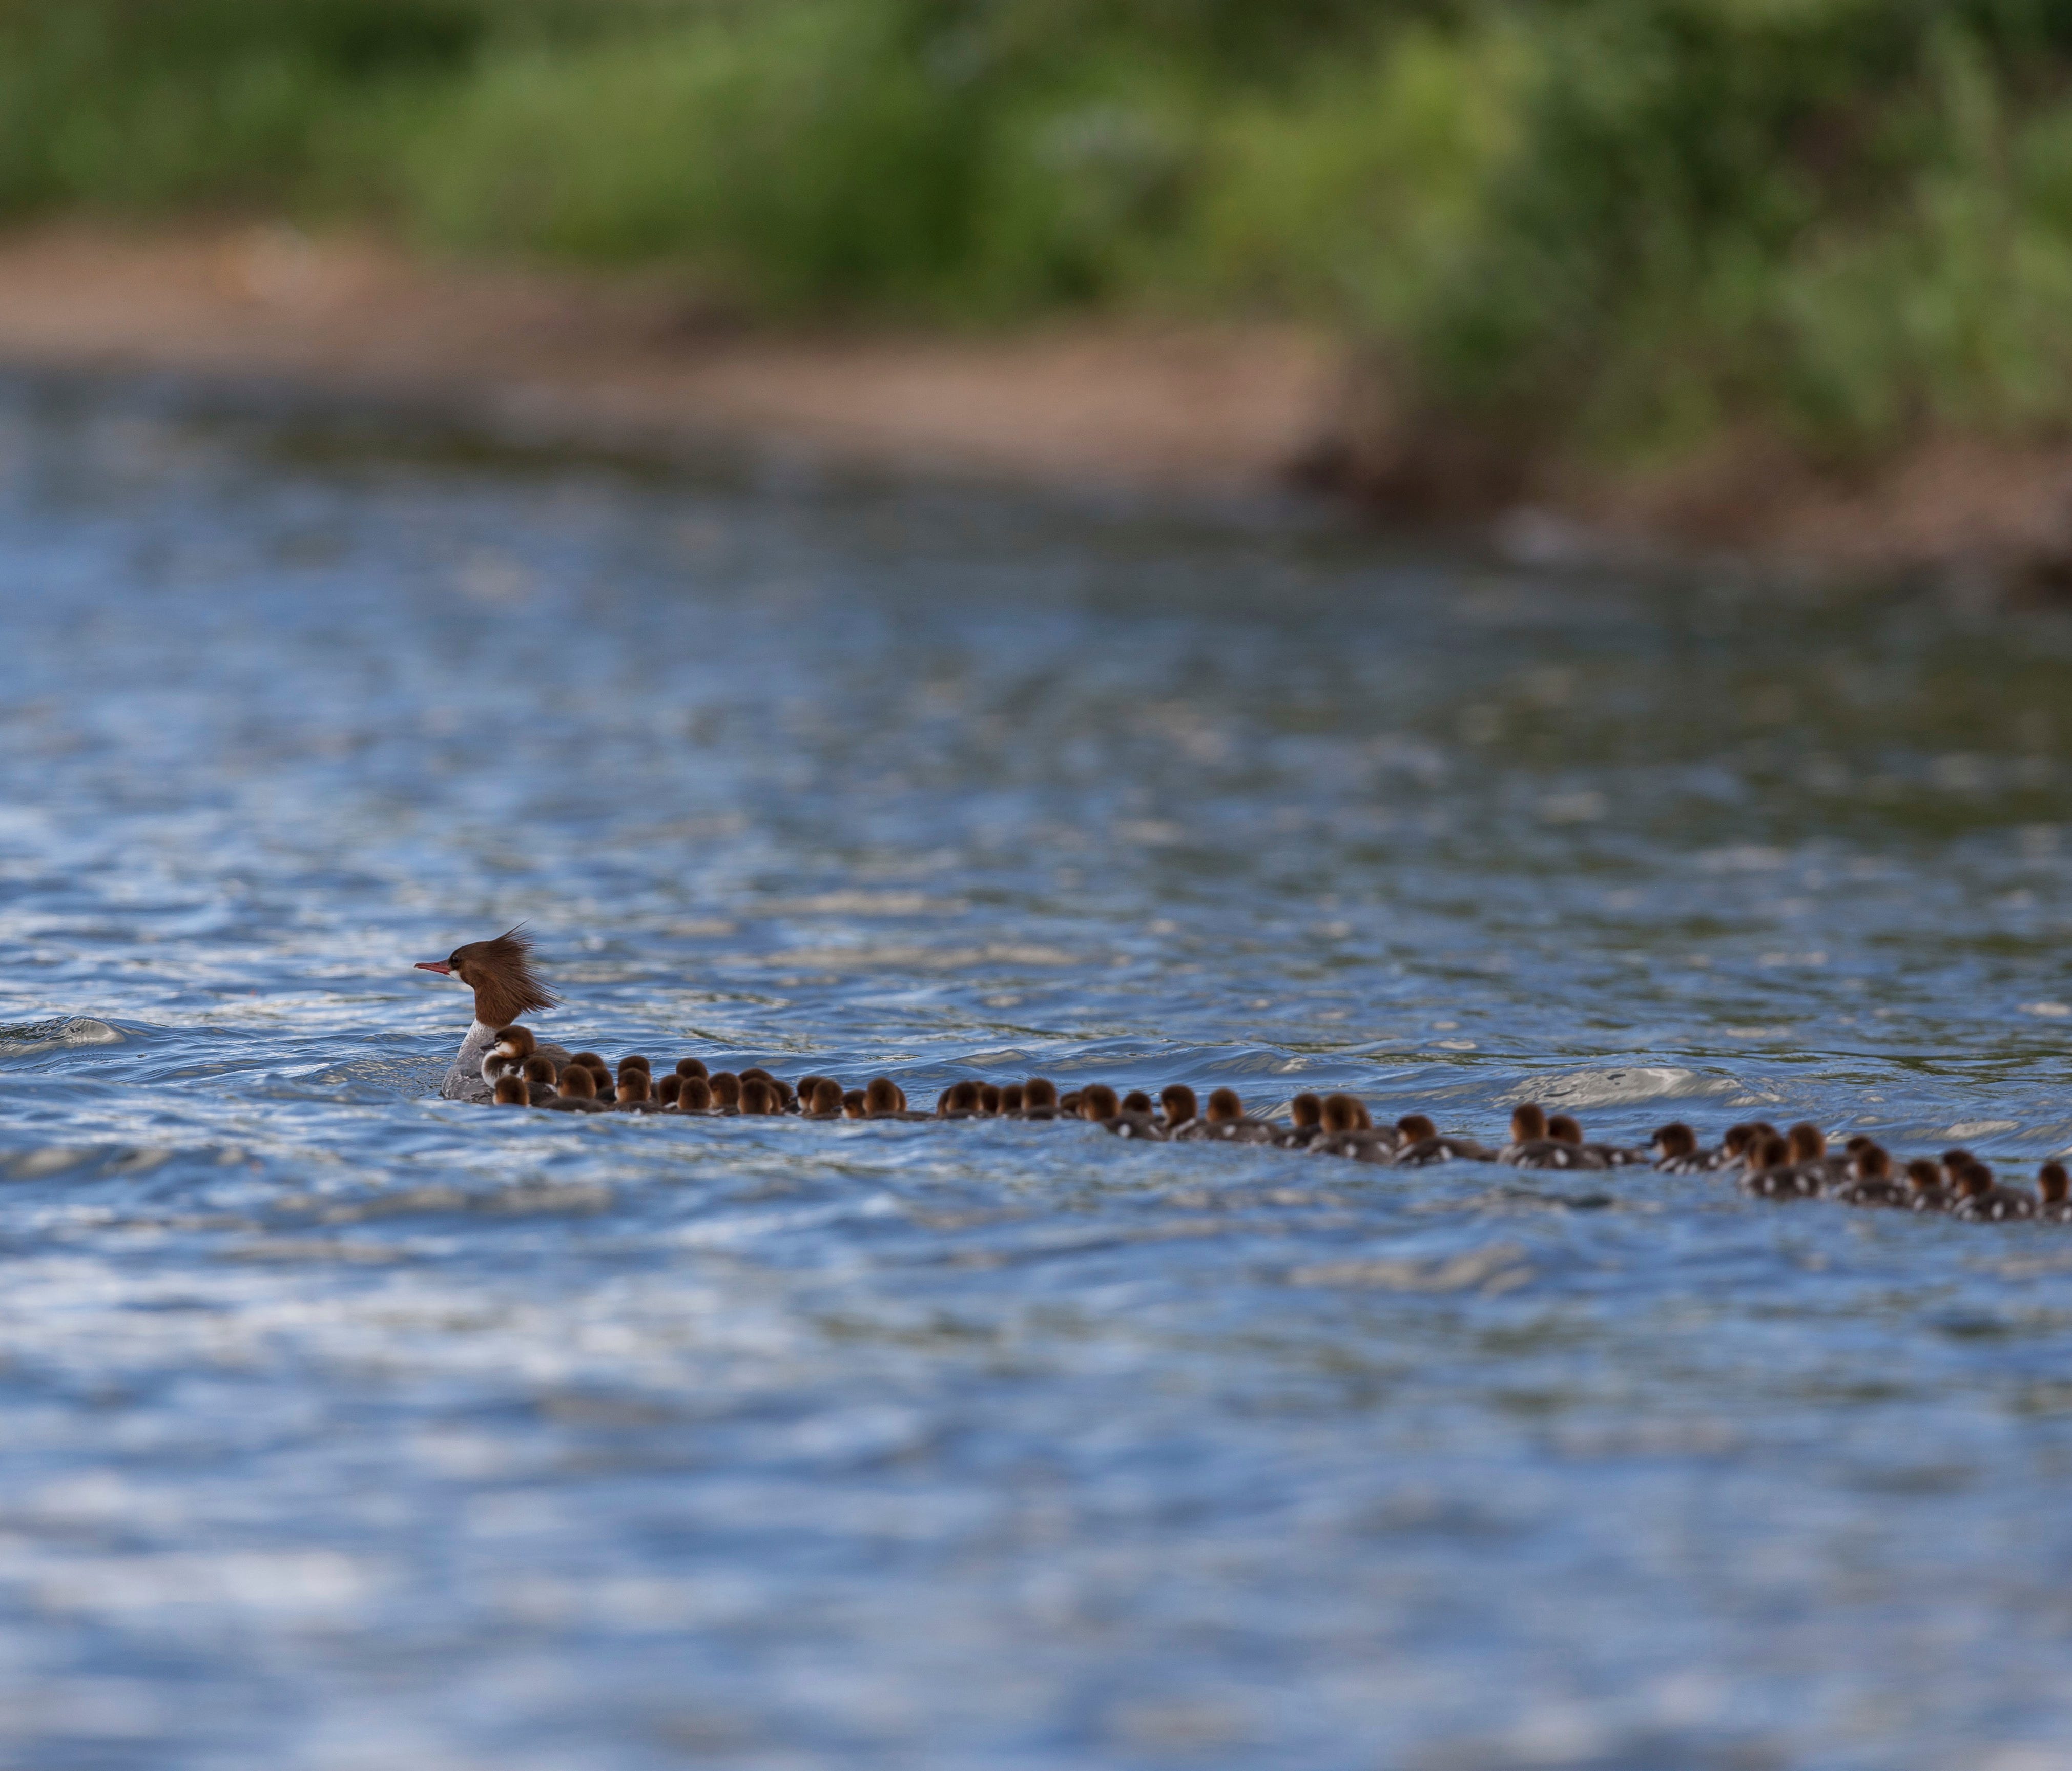 A June 27 photo provided by Brent Cizek shows a common merganser and a large group of ducklings following her, on Lake Bemidji in Bemidji, Minnesota.